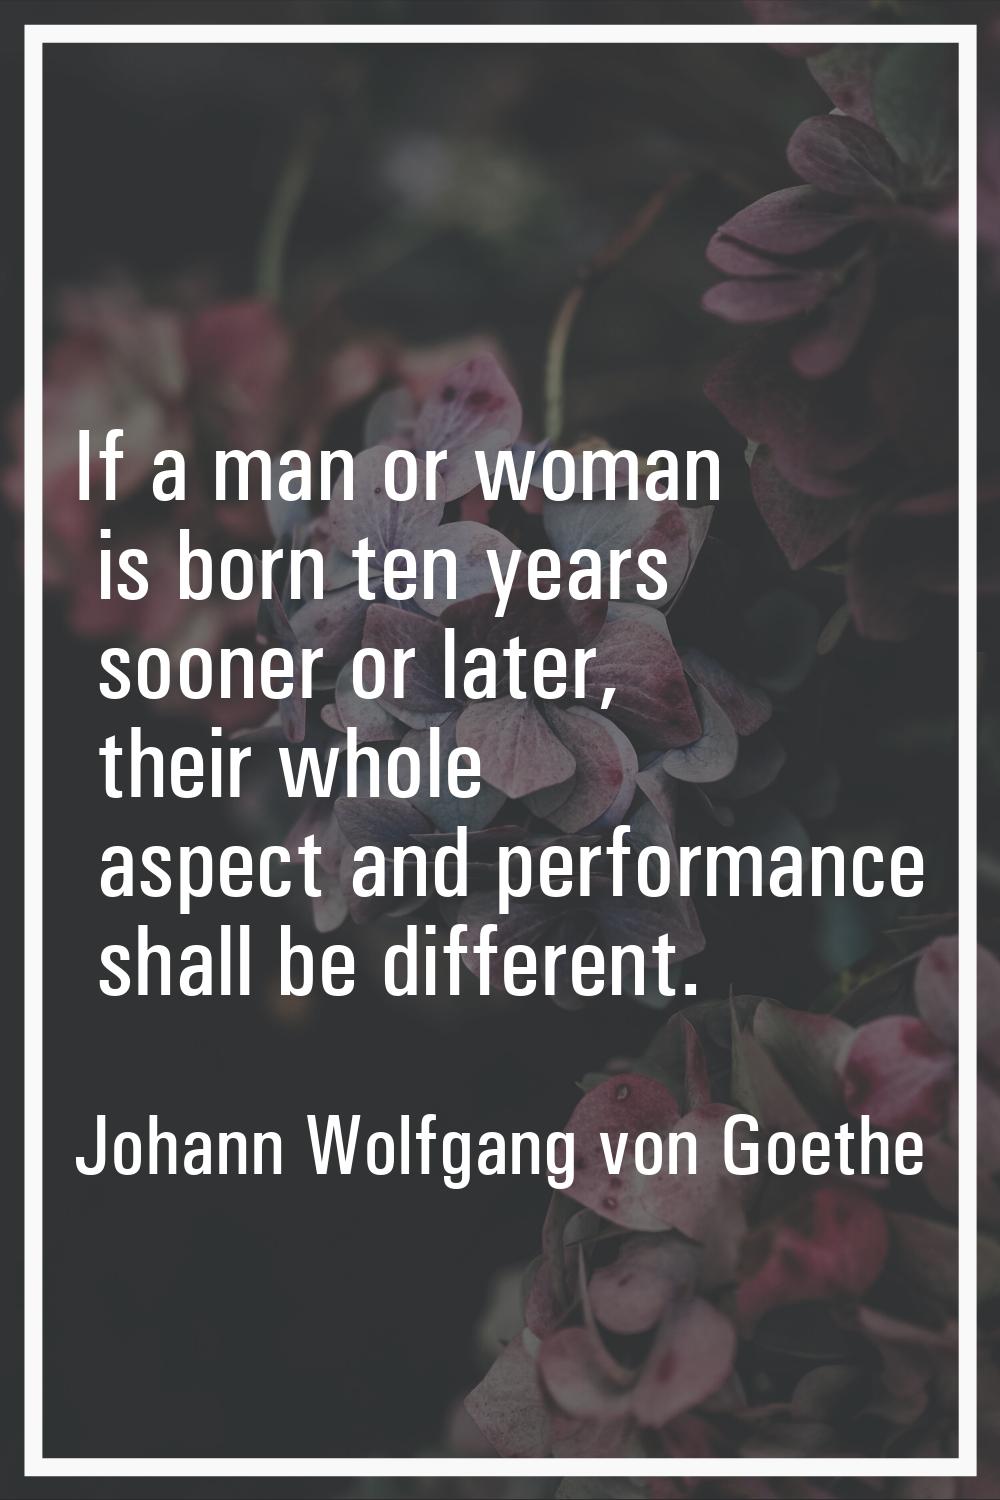 If a man or woman is born ten years sooner or later, their whole aspect and performance shall be di